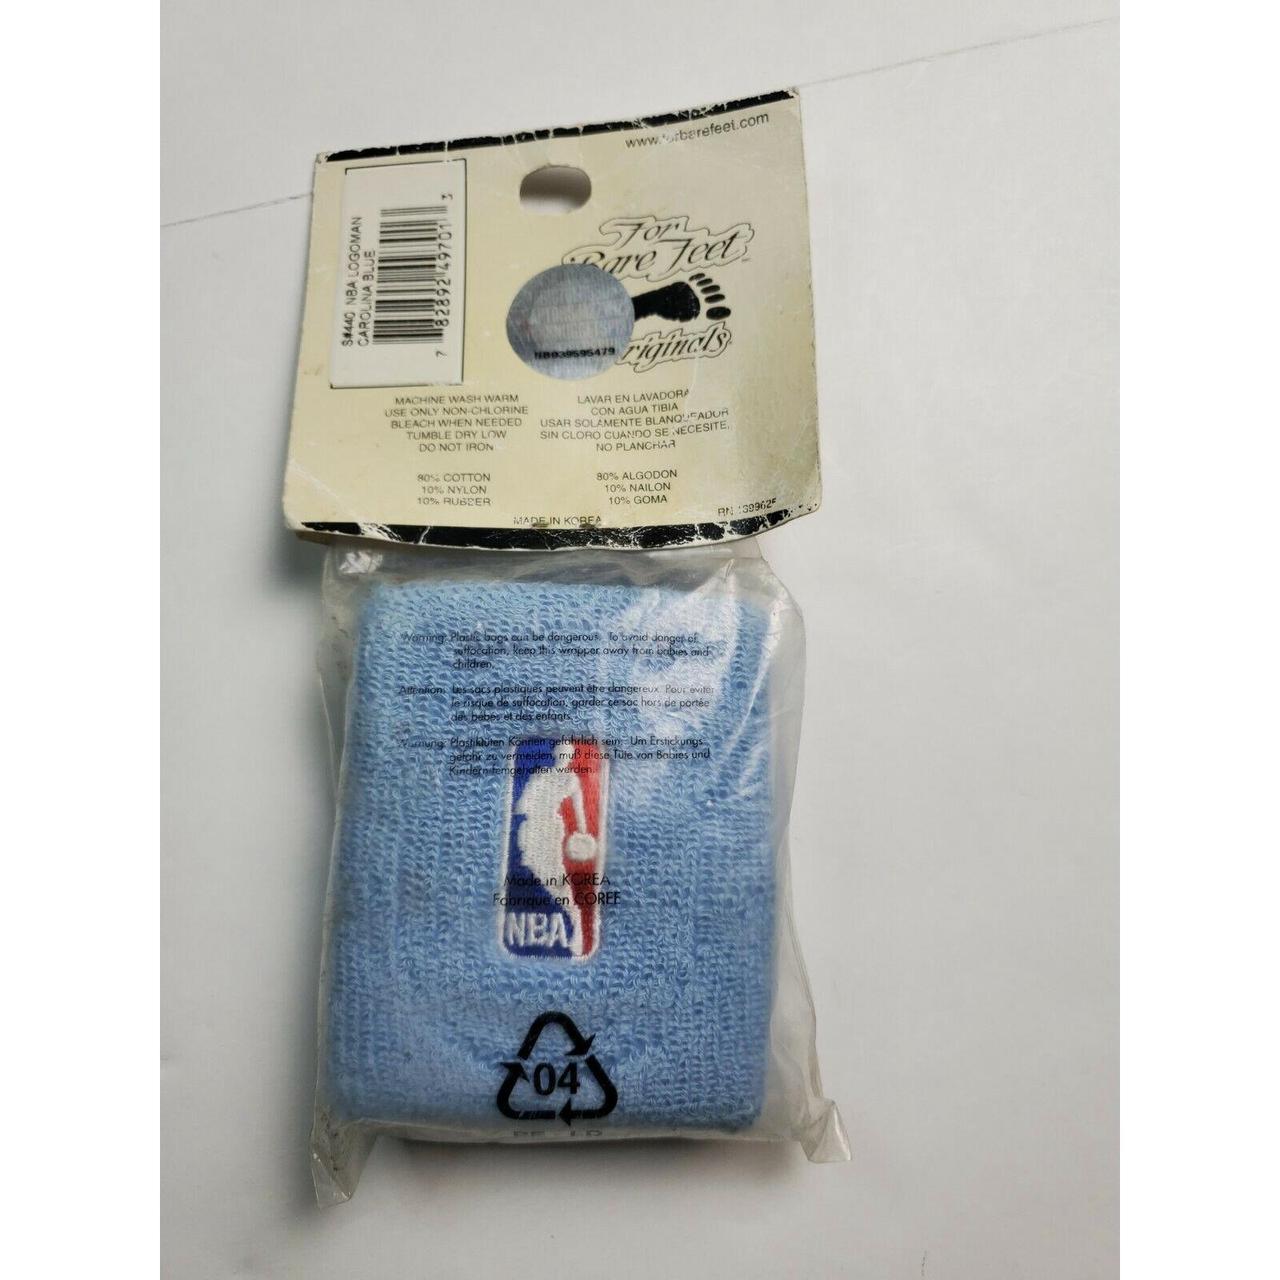 Product Image 3 - VINTAGE NBA TWO DOUBLE WIDE